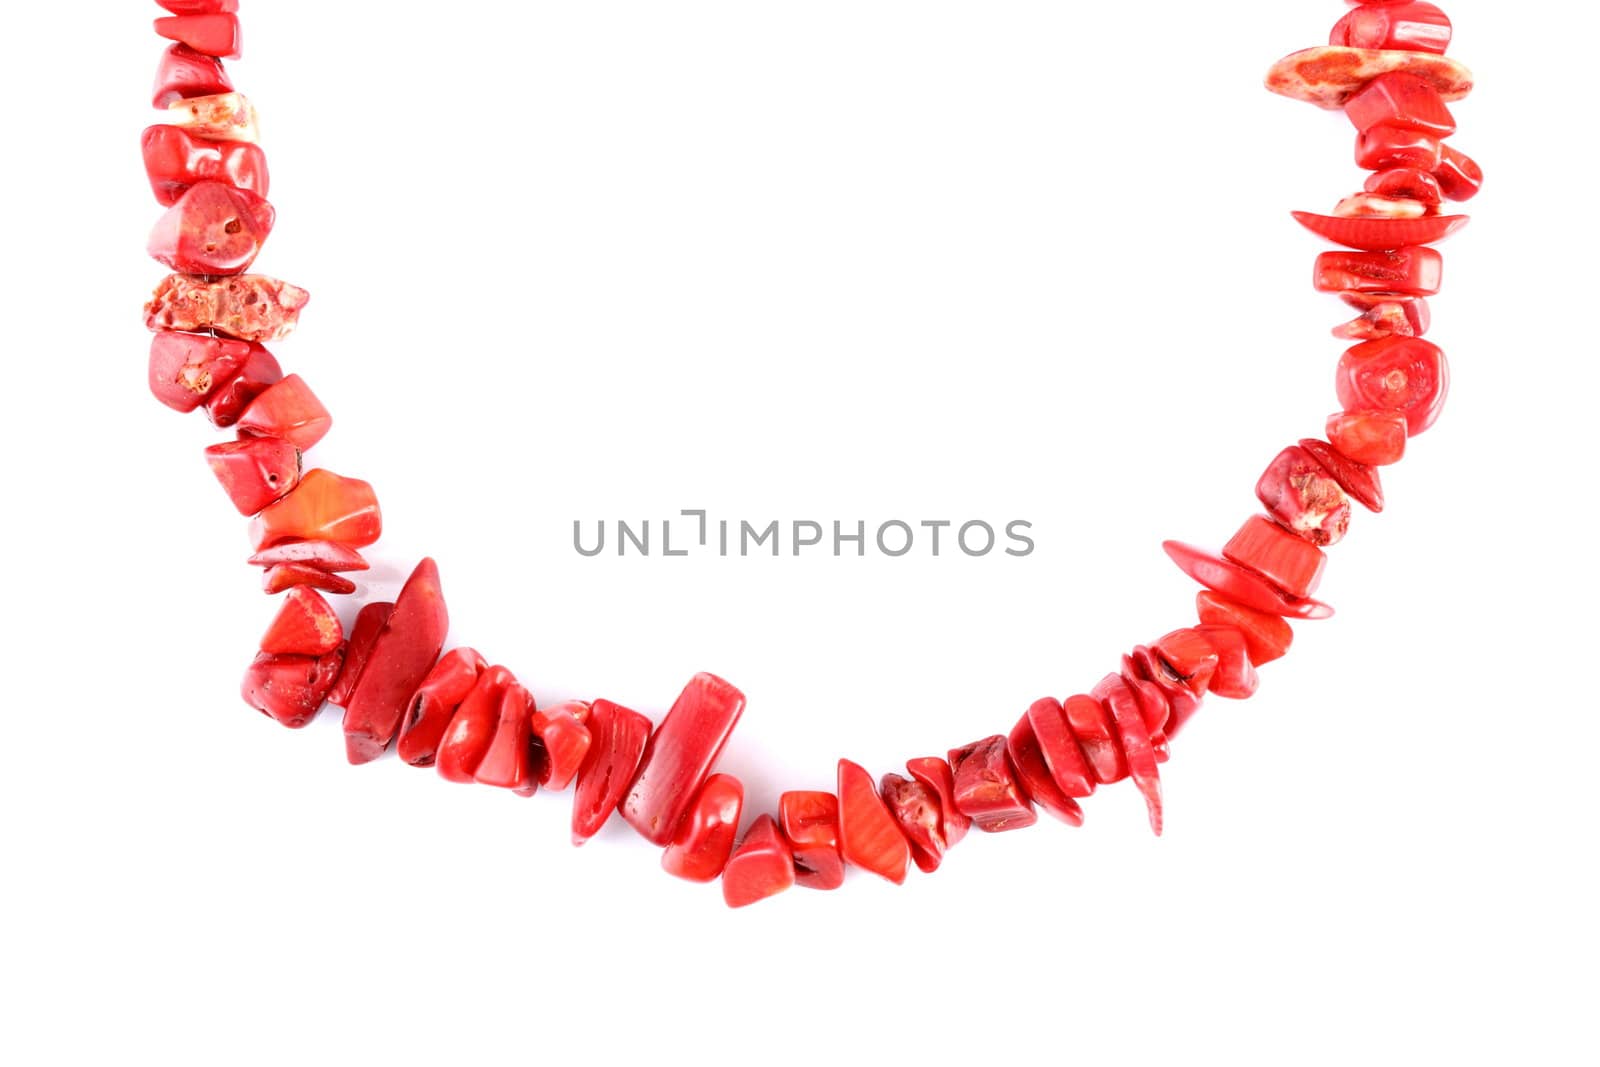 red coral beads over white background